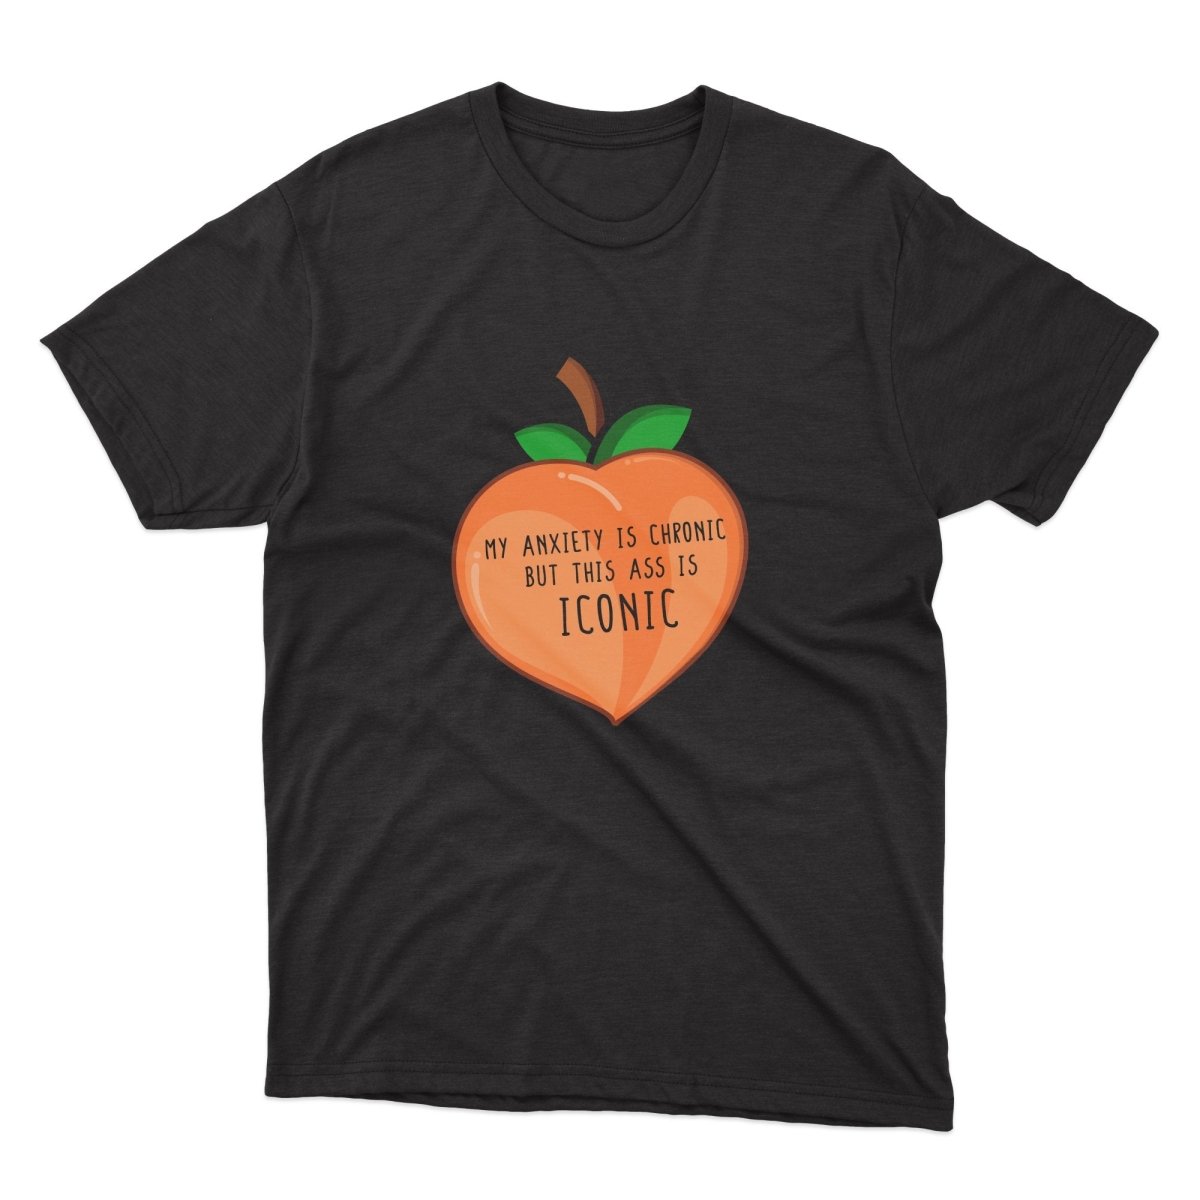 Ass Is Iconic Anxiety Is Chronic Shirt - stickerbullAss Is Iconic Anxiety Is Chronic ShirtShirtsPrintifystickerbull14734201897782881818BlackSa black t - shirt with an orange and a quote on it